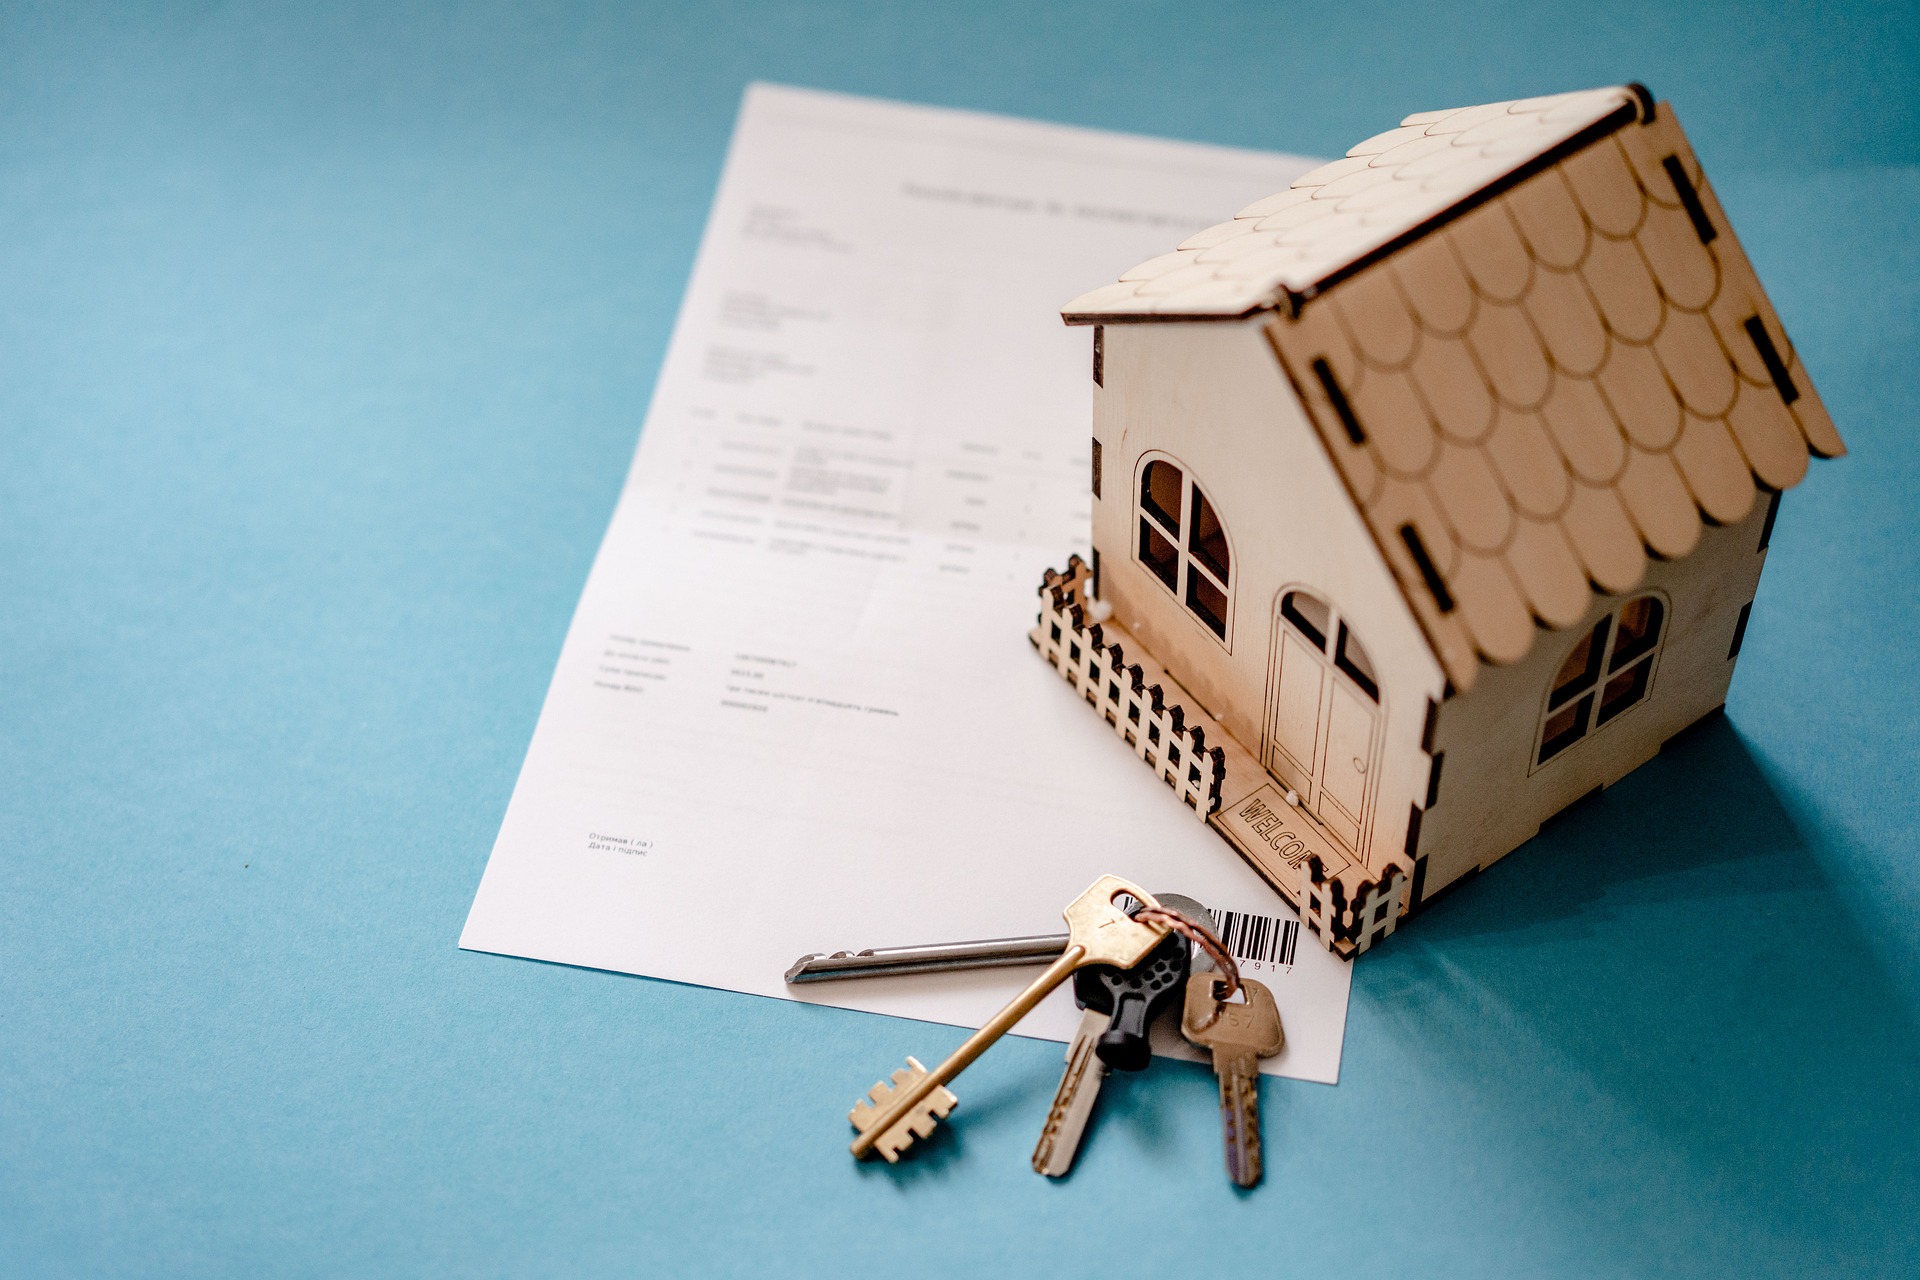 4 financial aspects to consider when buying a house